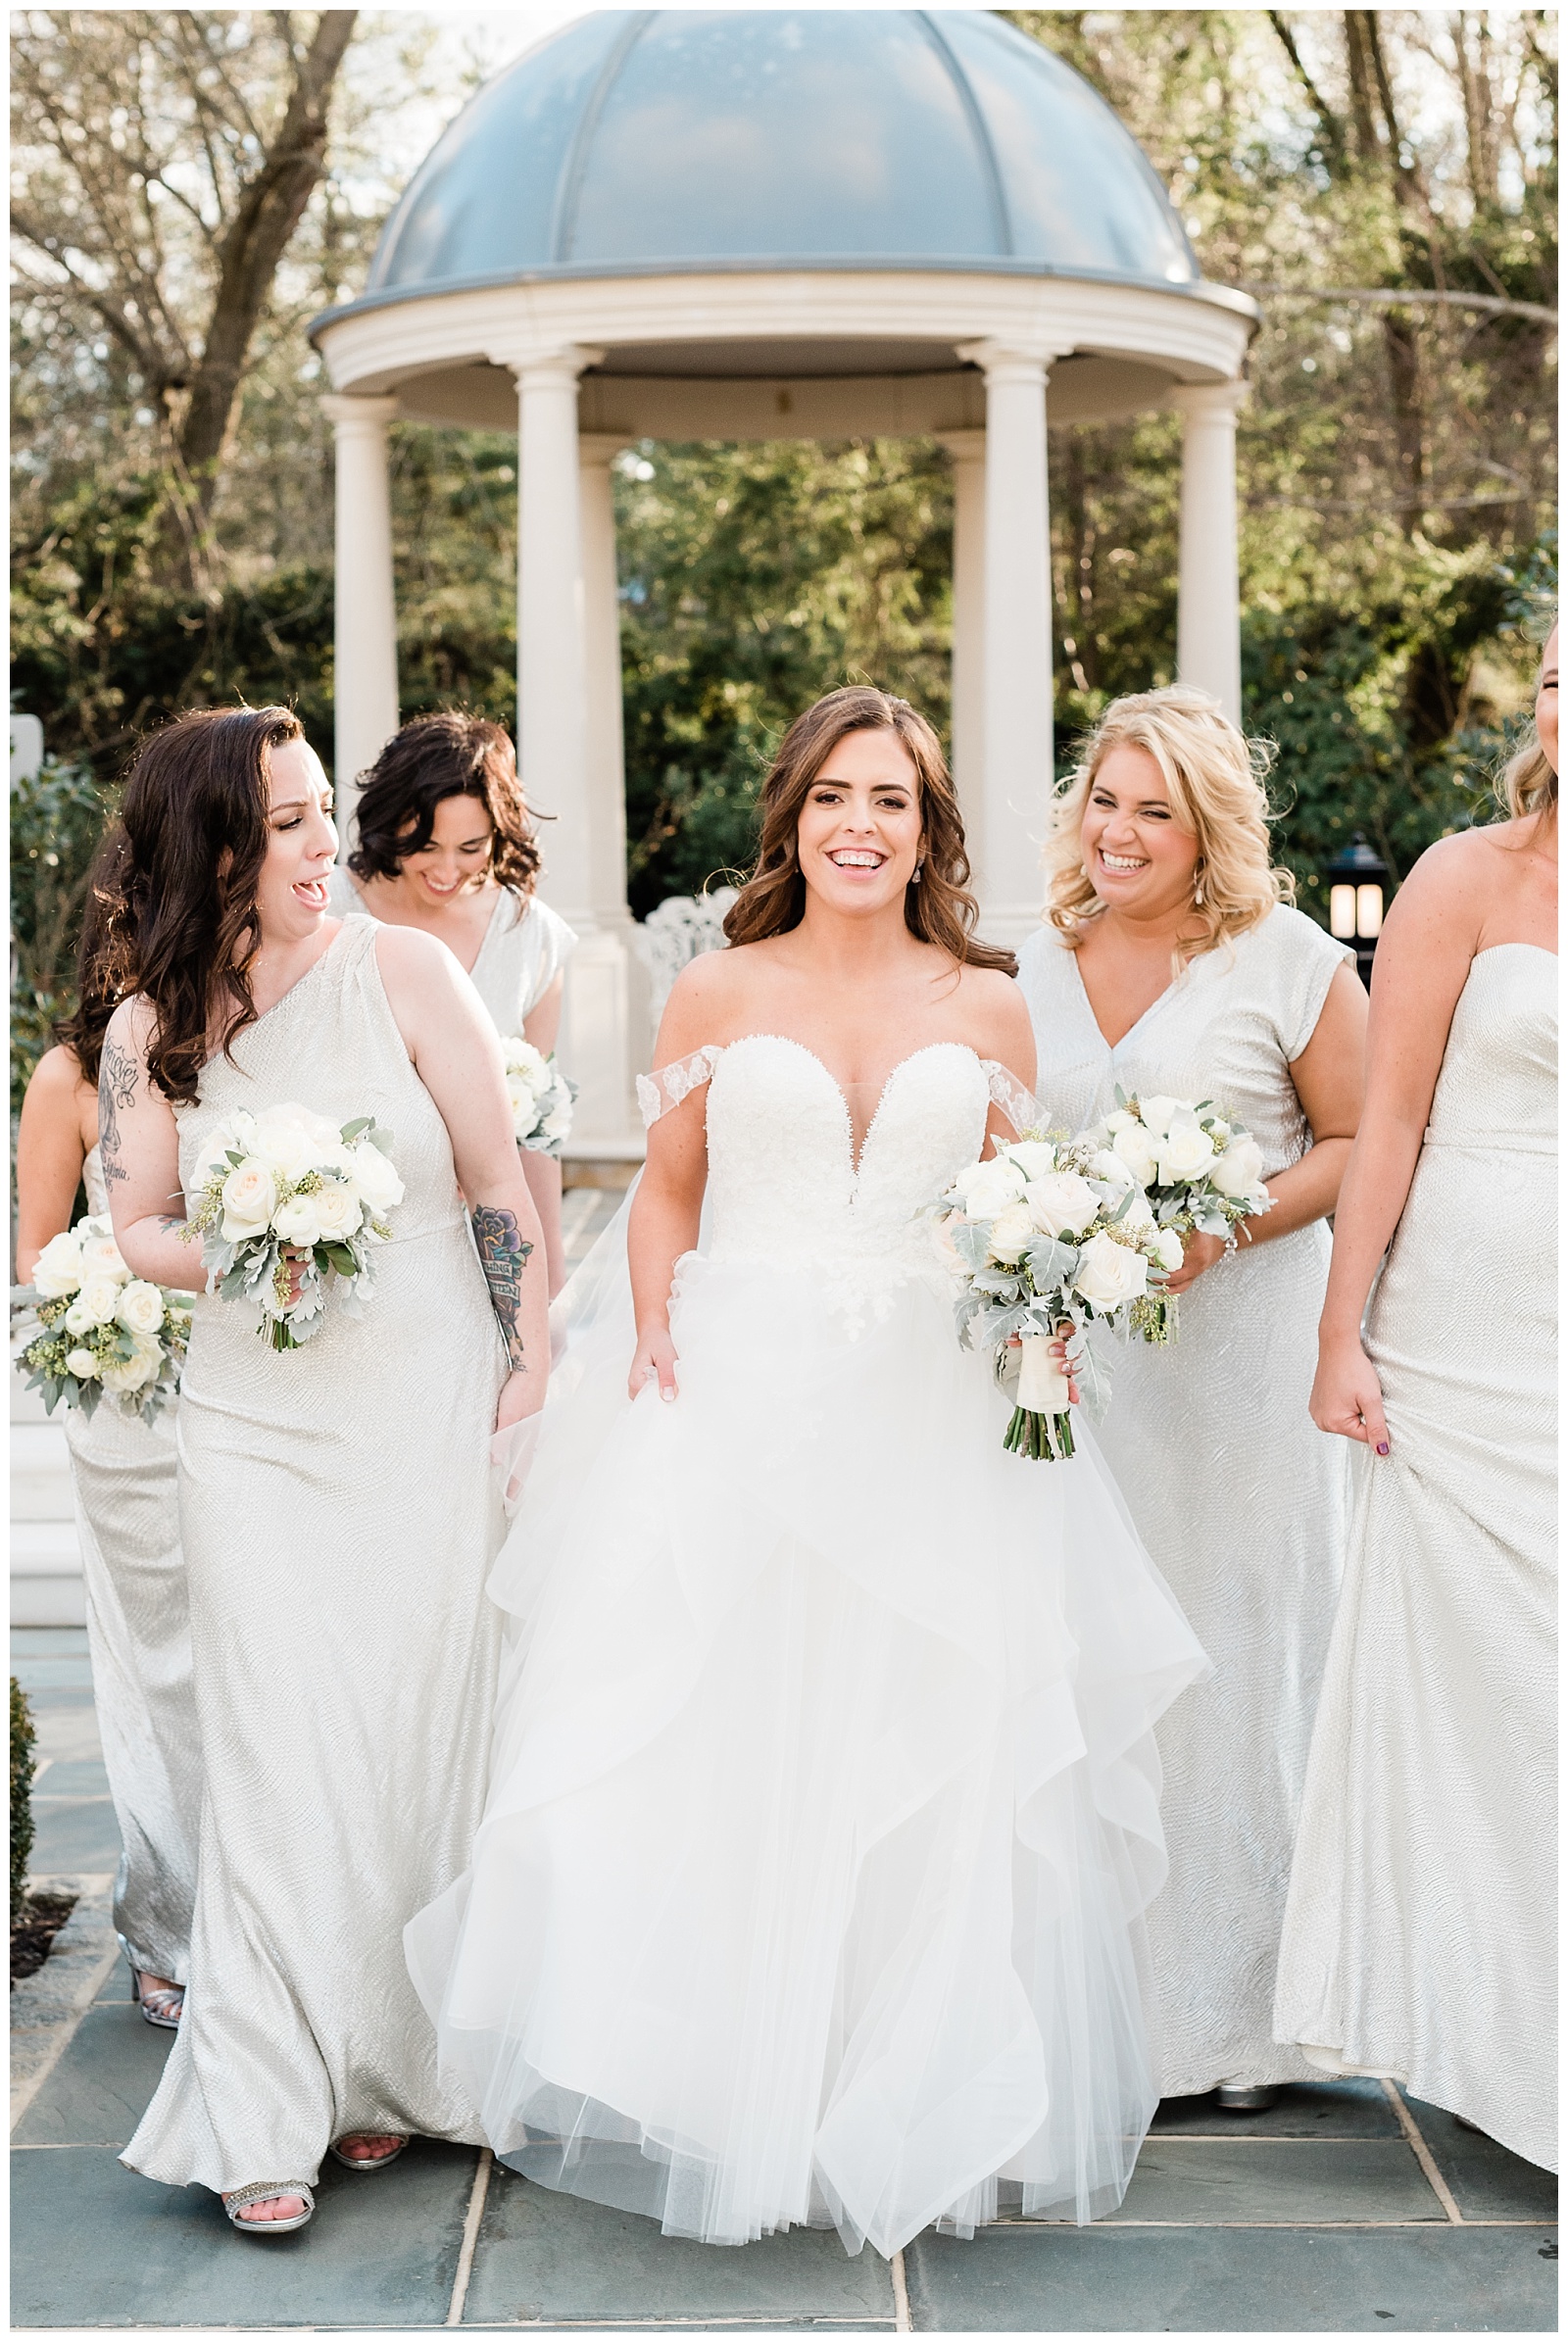 park chateau, nj wedding photographer, photo, venue, wedding venue, bridal party, wedding party, bridesmaids, candid, walking, light and airy